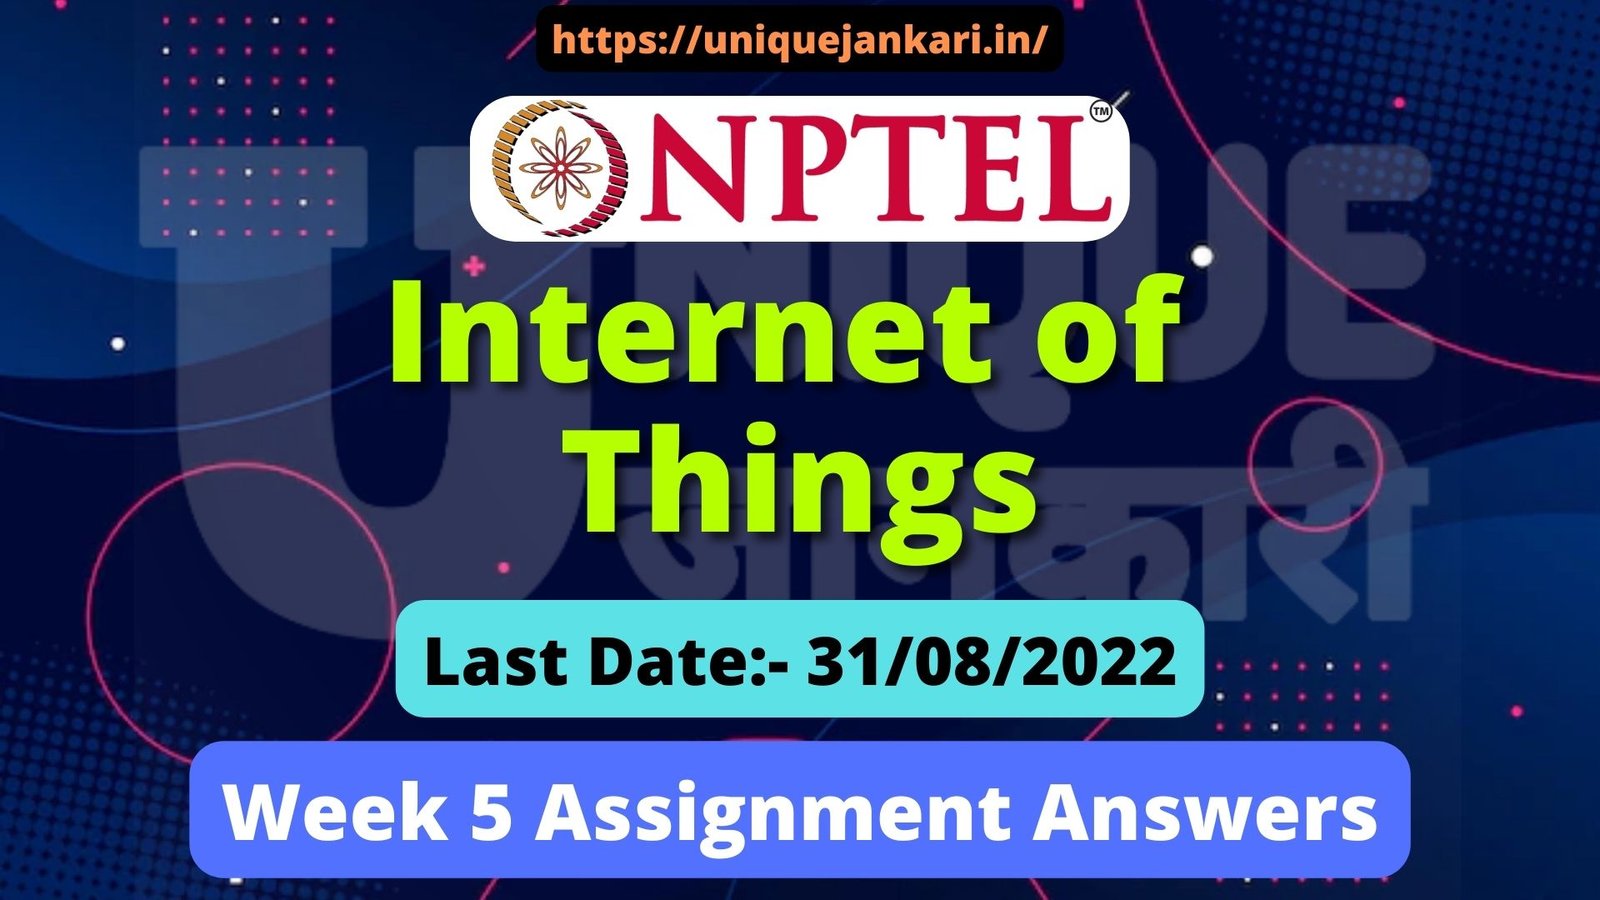 nptel assignment 5 answers 2022